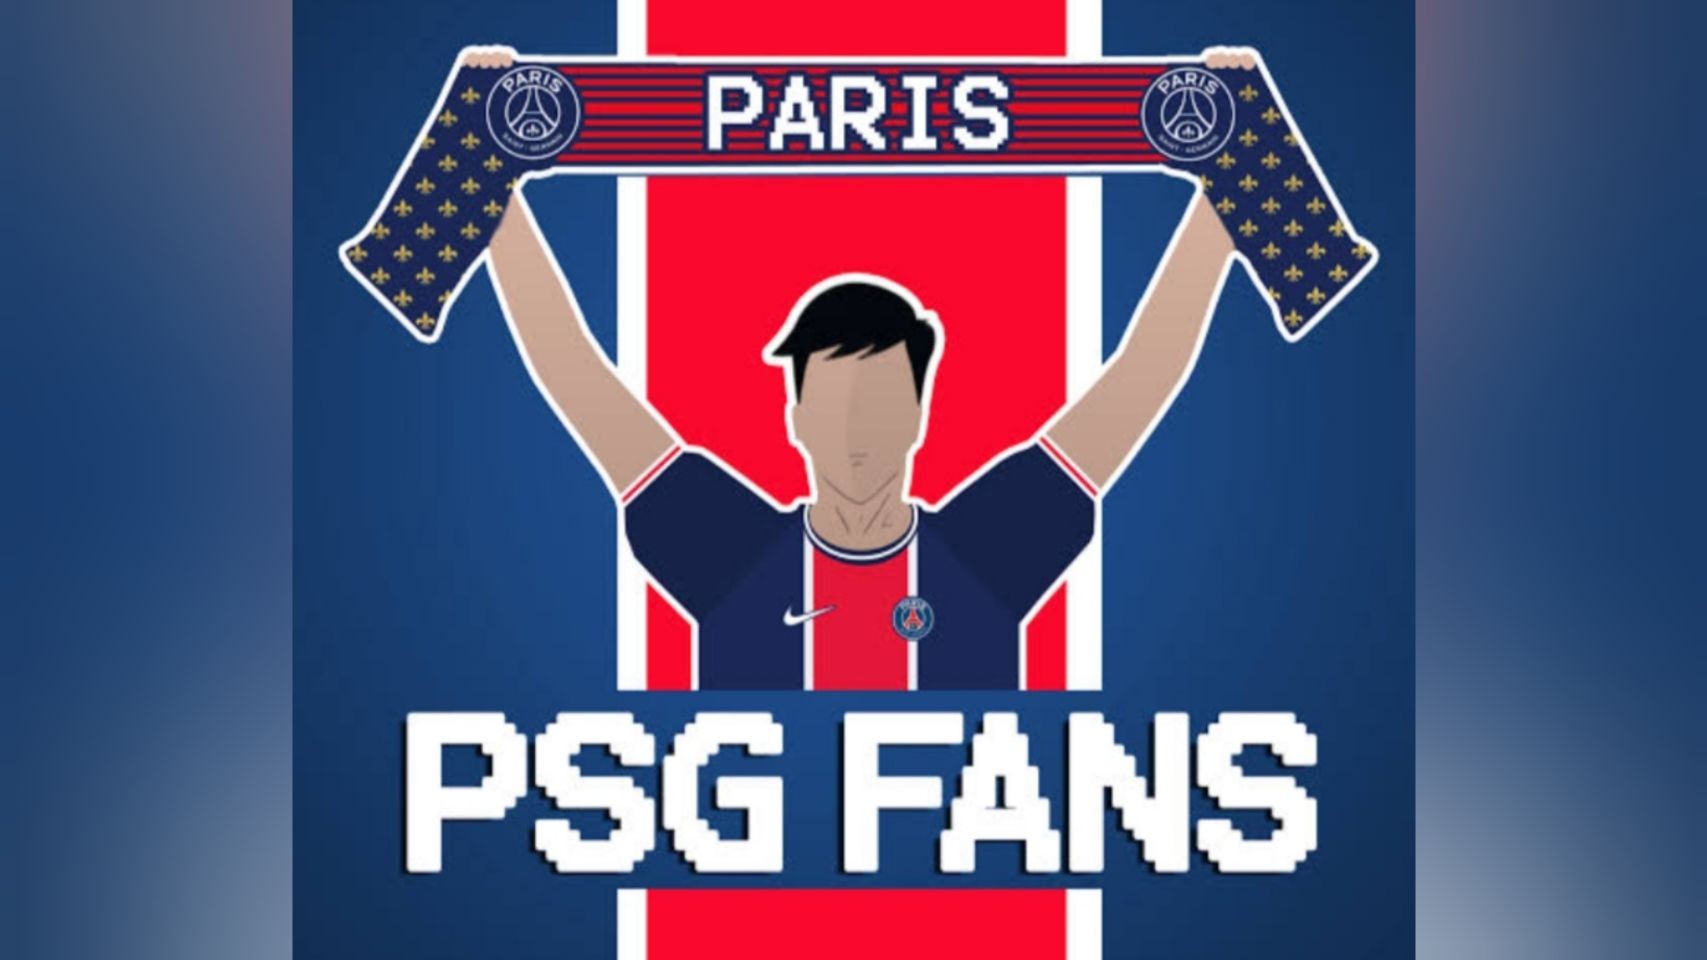 PSG Fans 🗼 • ShareChat Photos and Videos